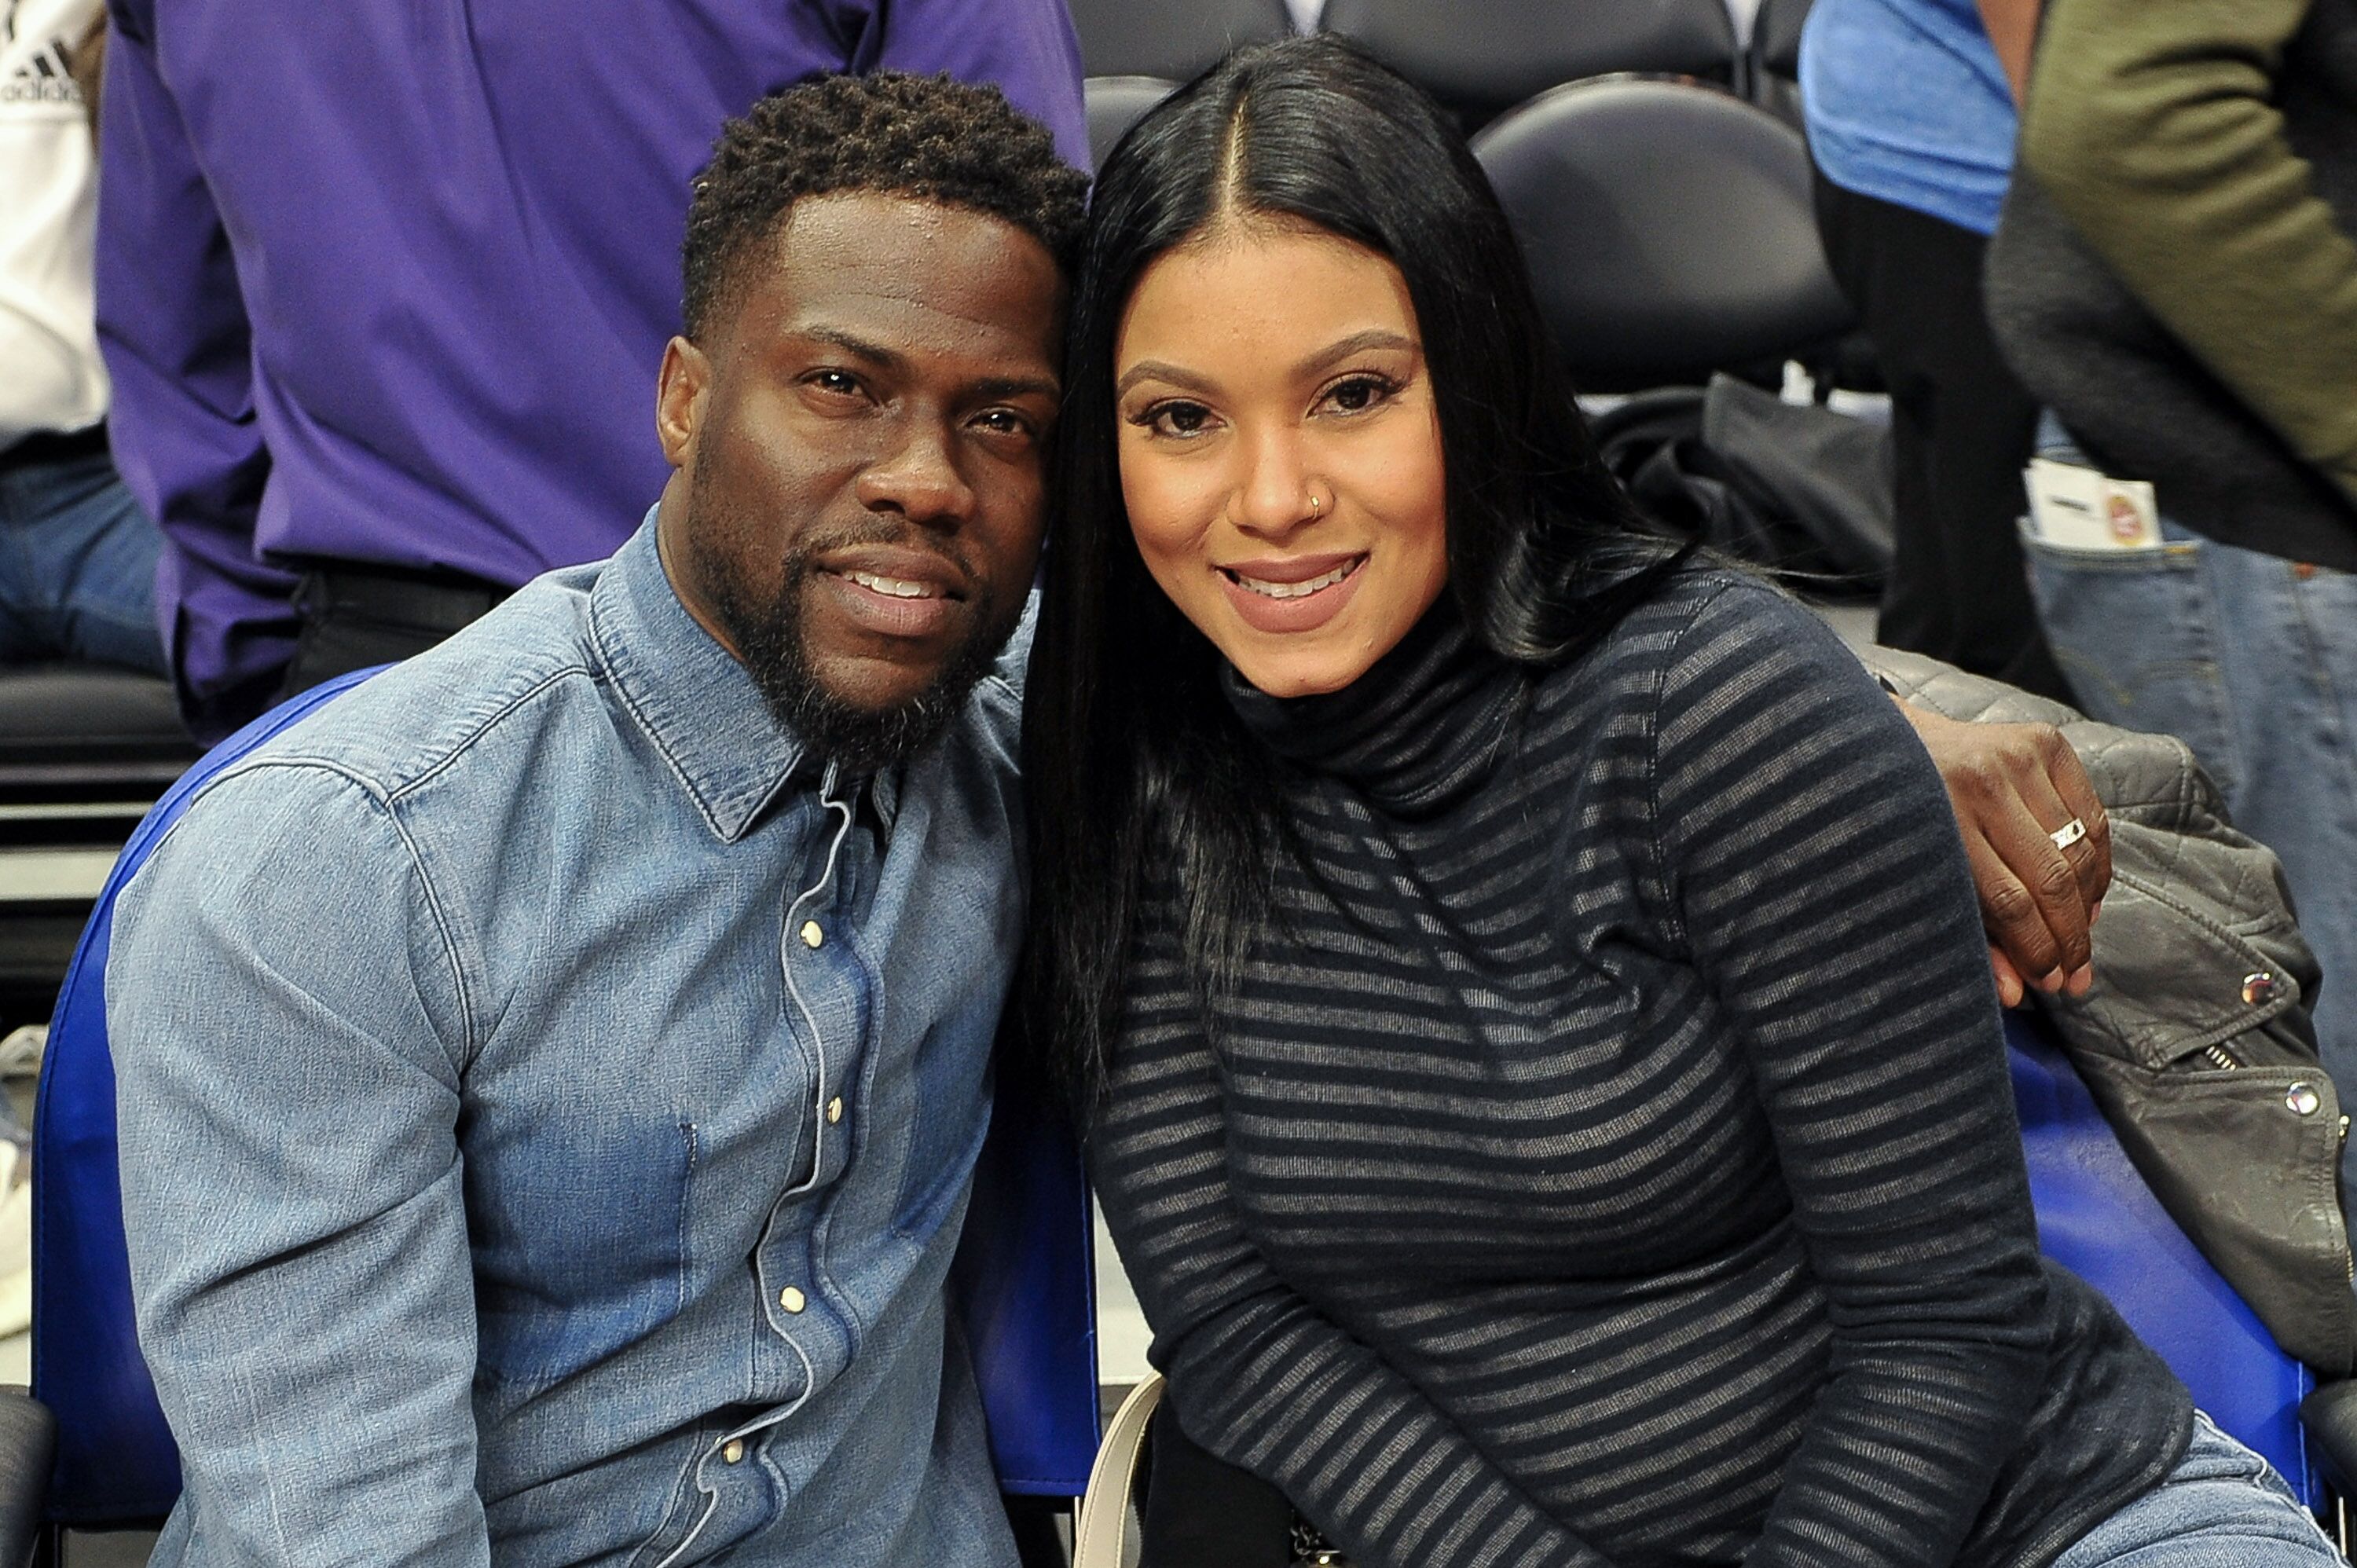 Kevin Hart and Eniko Parrish at a basketball game at Staples Center on January 22, 2018 in Los Angeles, California | Photo: Getty Images 